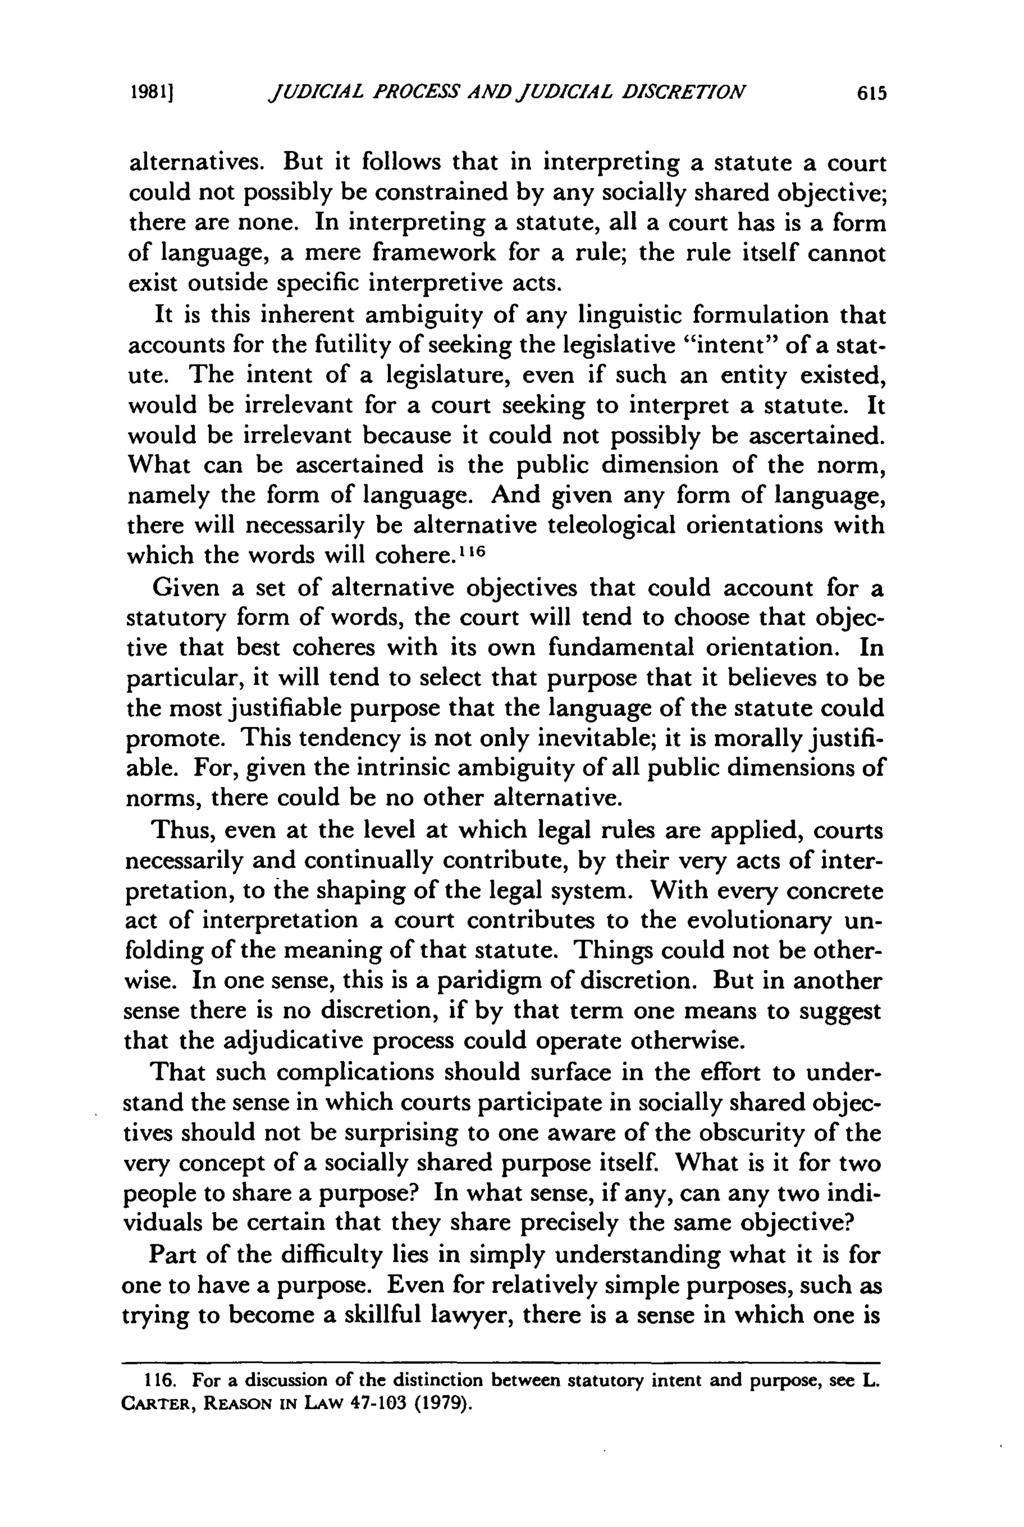 1981] Pannier: The Nature of the Judicial Process and Judicial Discretion JUDICIAL PROCESS AND JUDICIAL DISCRETION alternatives.